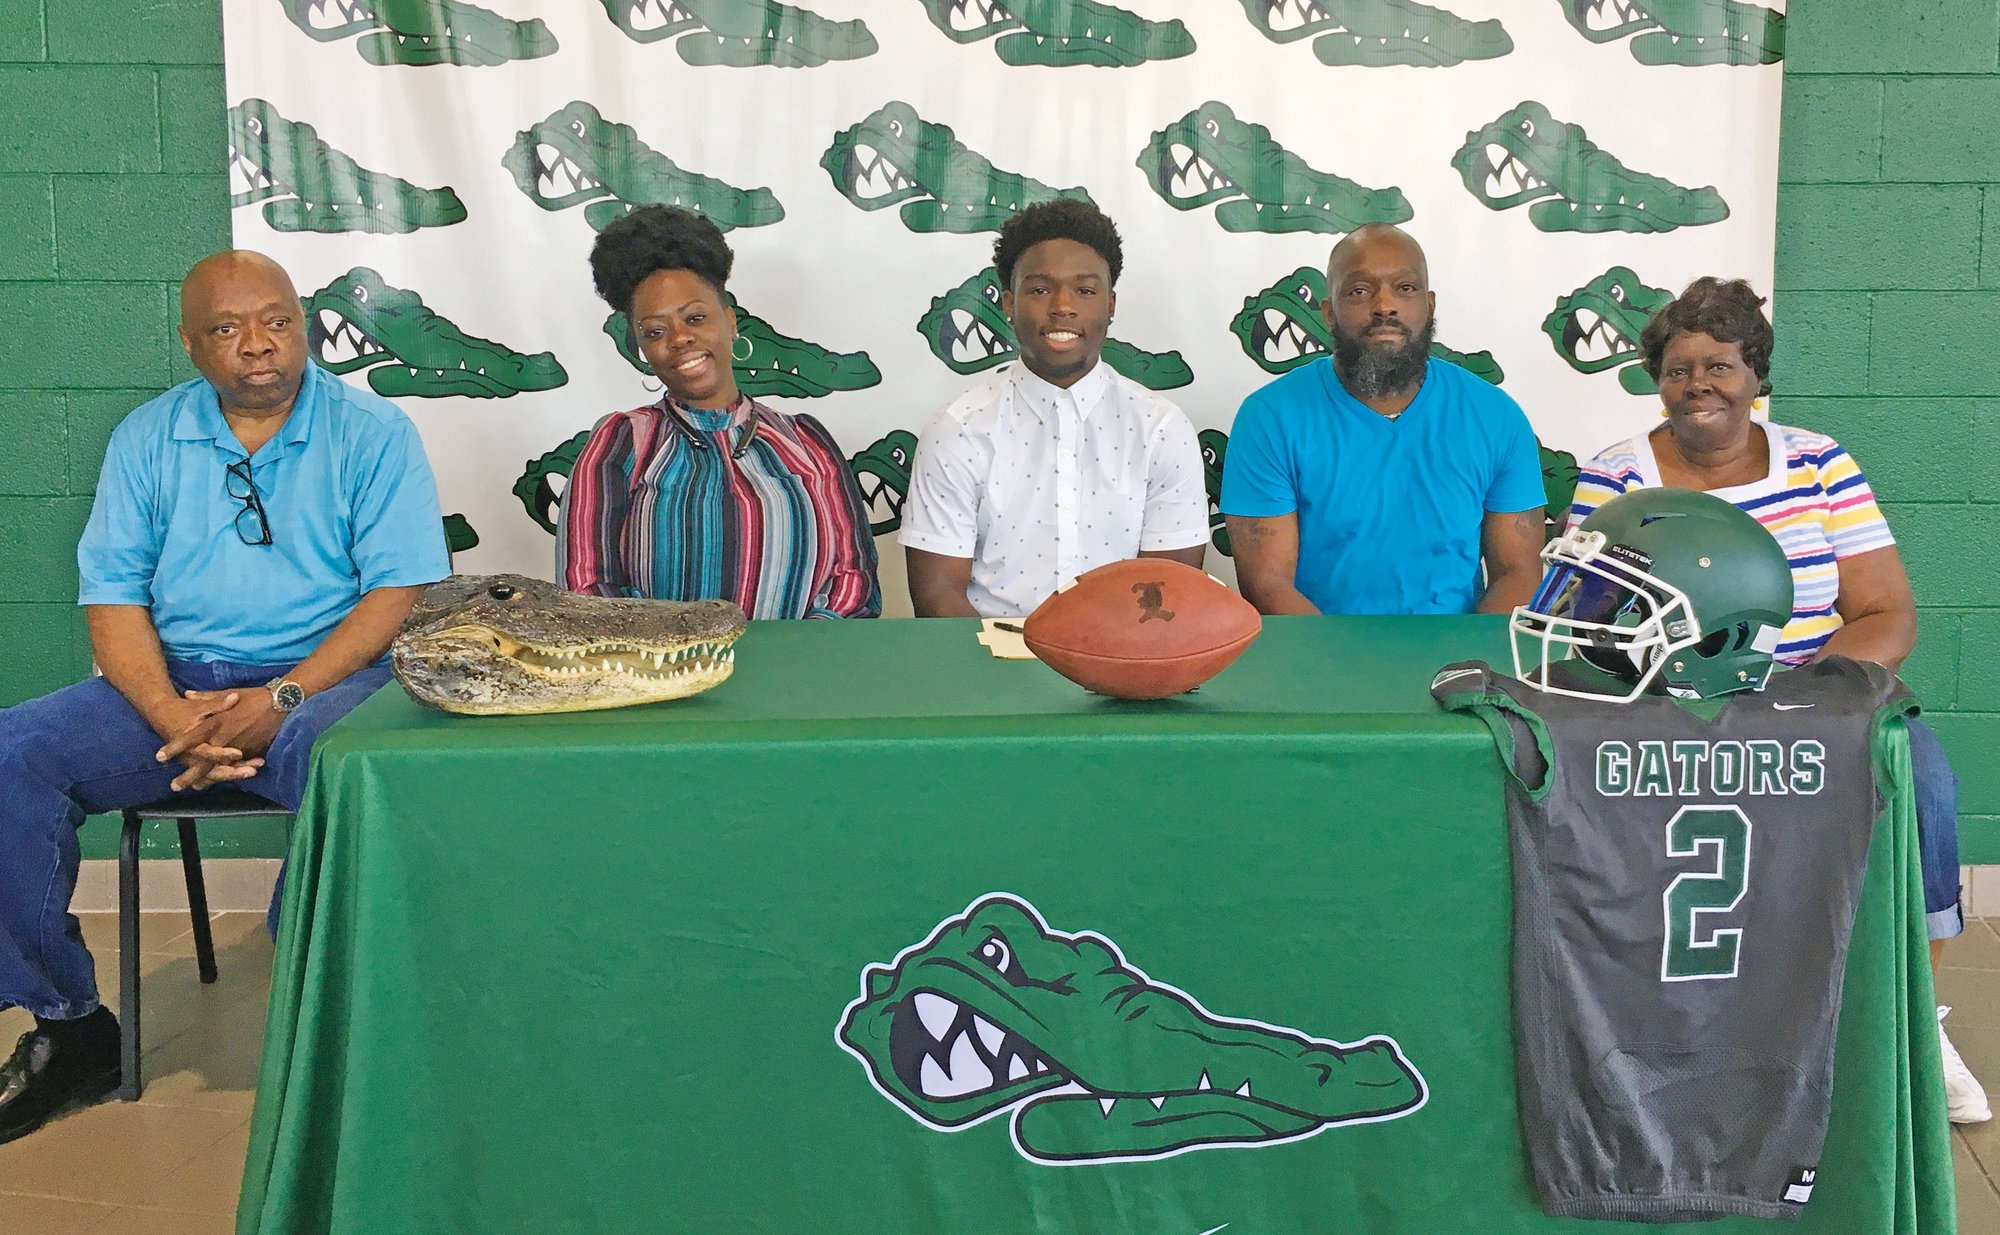 Lakewood High School's Javontae' Jones, seated in the center, has signed to play college football with Greensboro College. Seated with Jones from left to right are grandfather James Scott, mother Cheryl Jones, father Joseph Jones and grandmother Millie Scott,